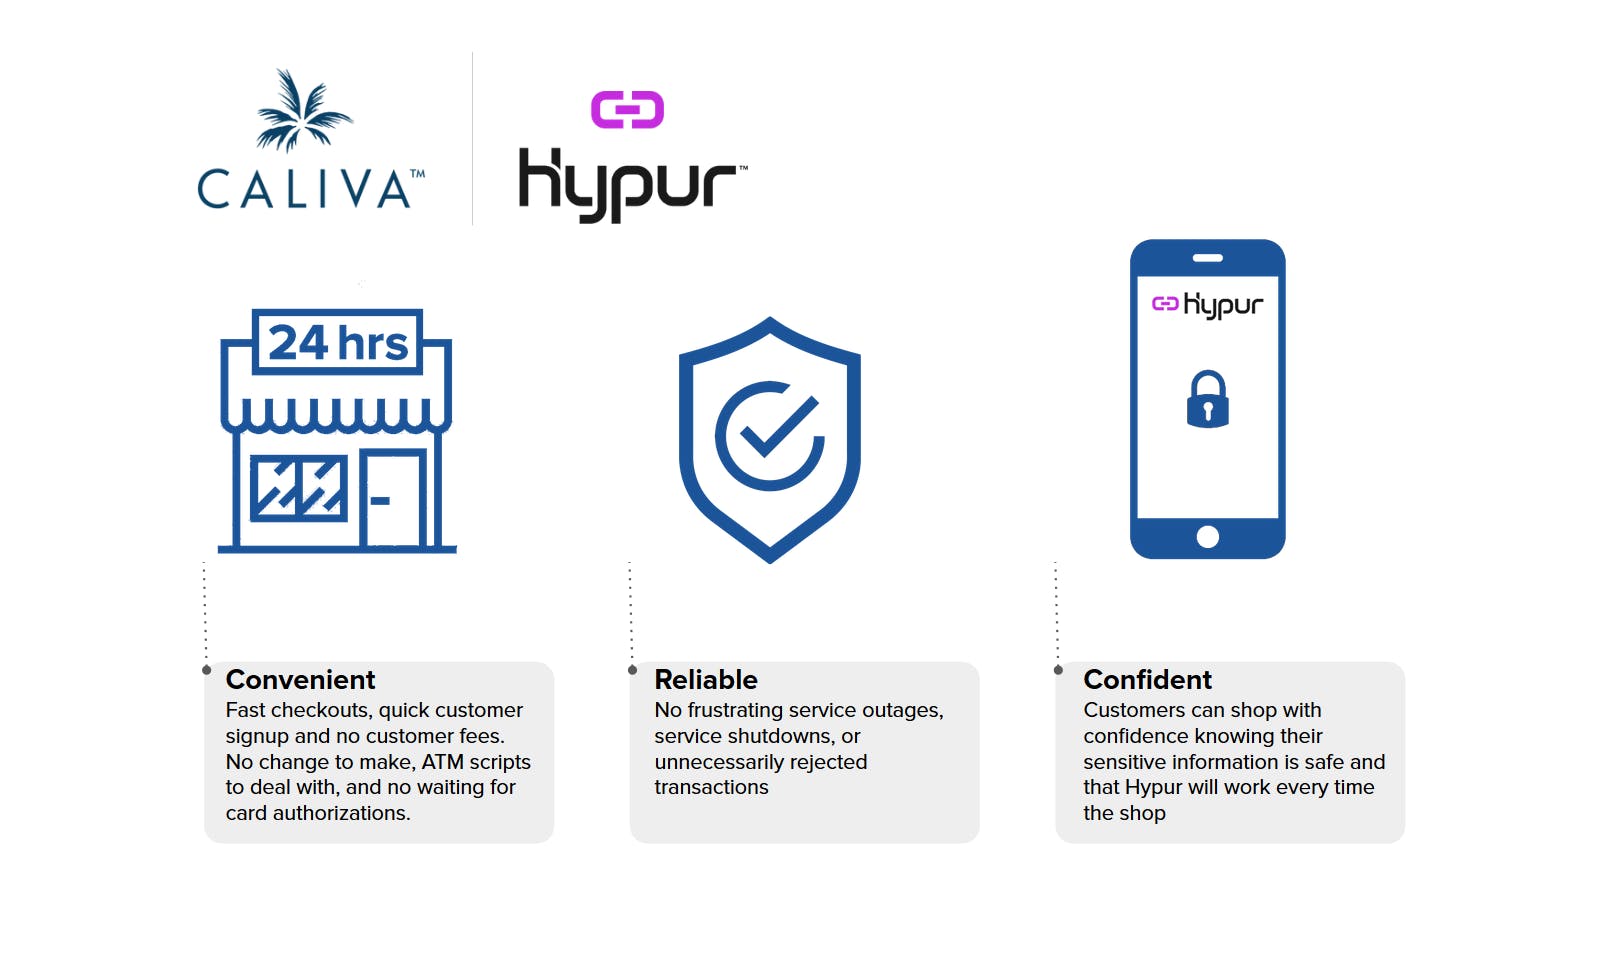 Caliva now offers Hypur, a leading digital payment, as an easy and reliable way to pay for your purchases. 